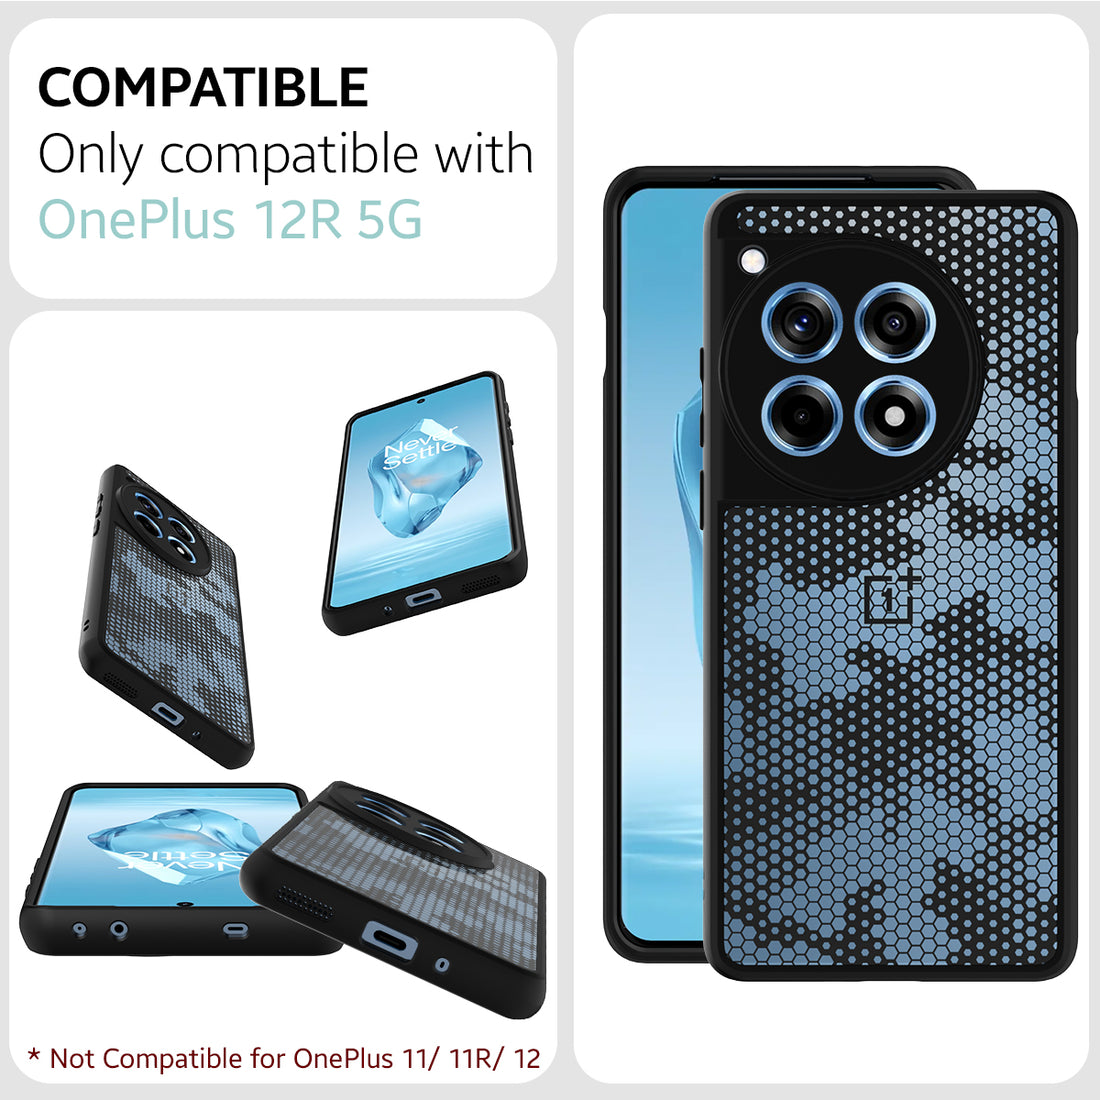 [FOSO] OnePlus 12R 5G Back Cover Case - Black (Honeycomb)